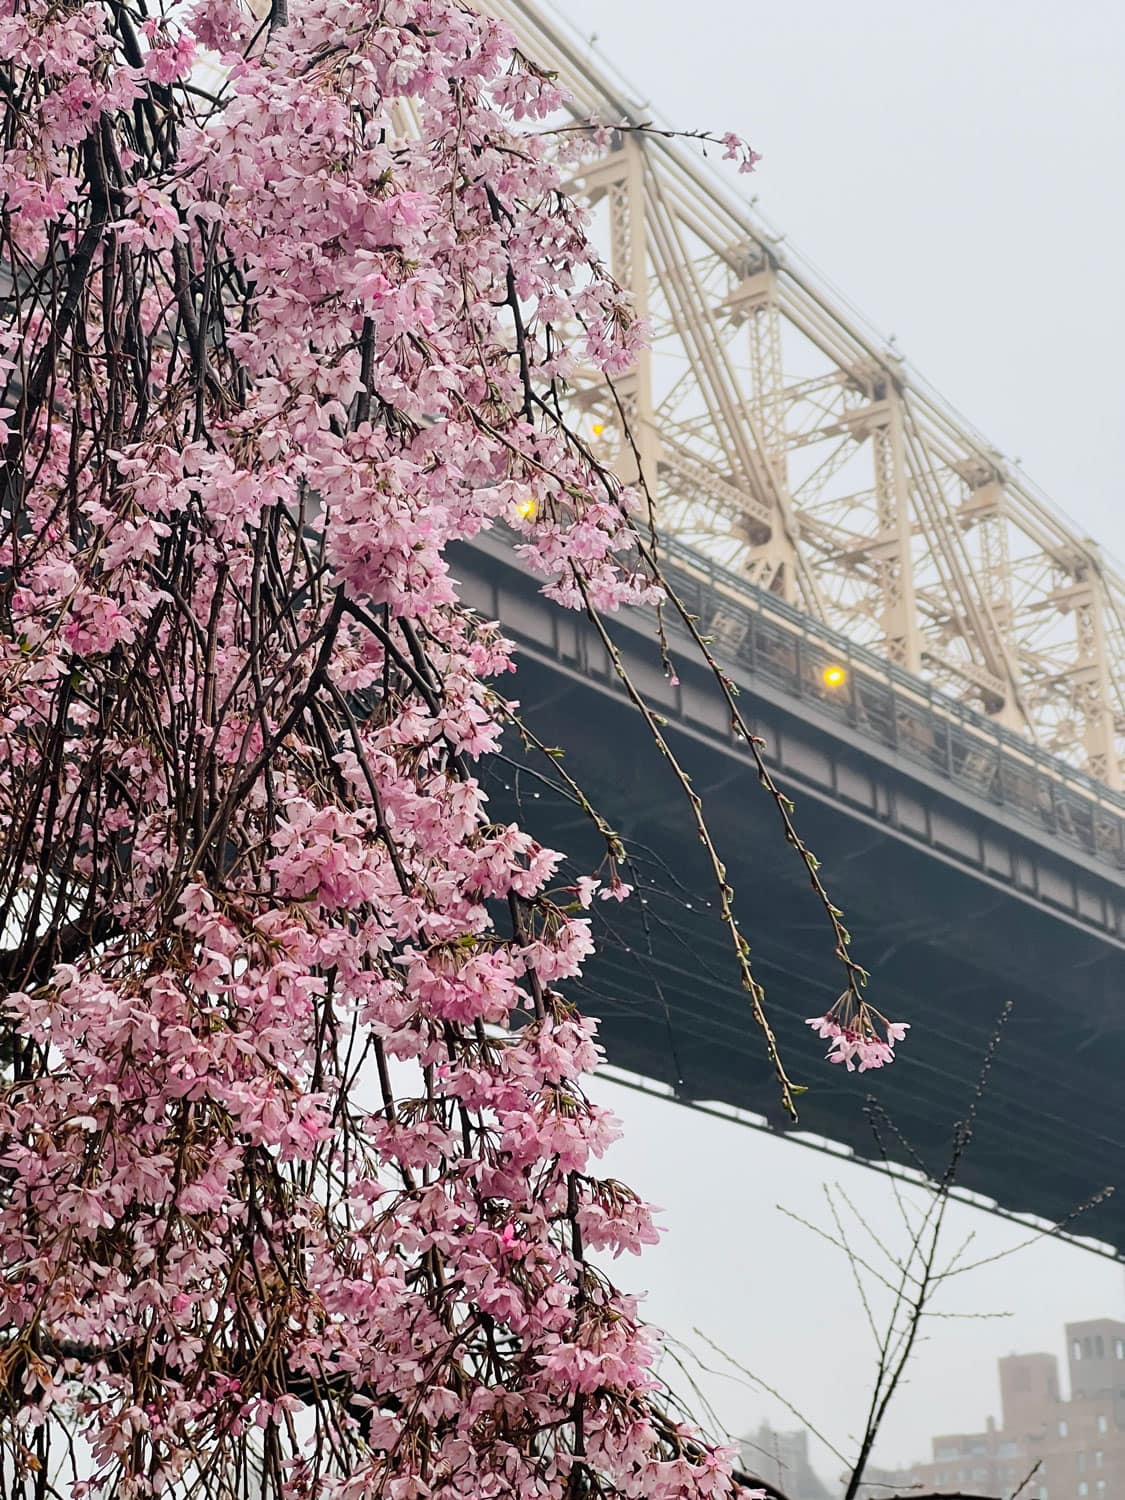 Tips on seeing the cherry blossoms in New York City including Roosevelt Island with views of Manhattan and the Queensboro Bridge